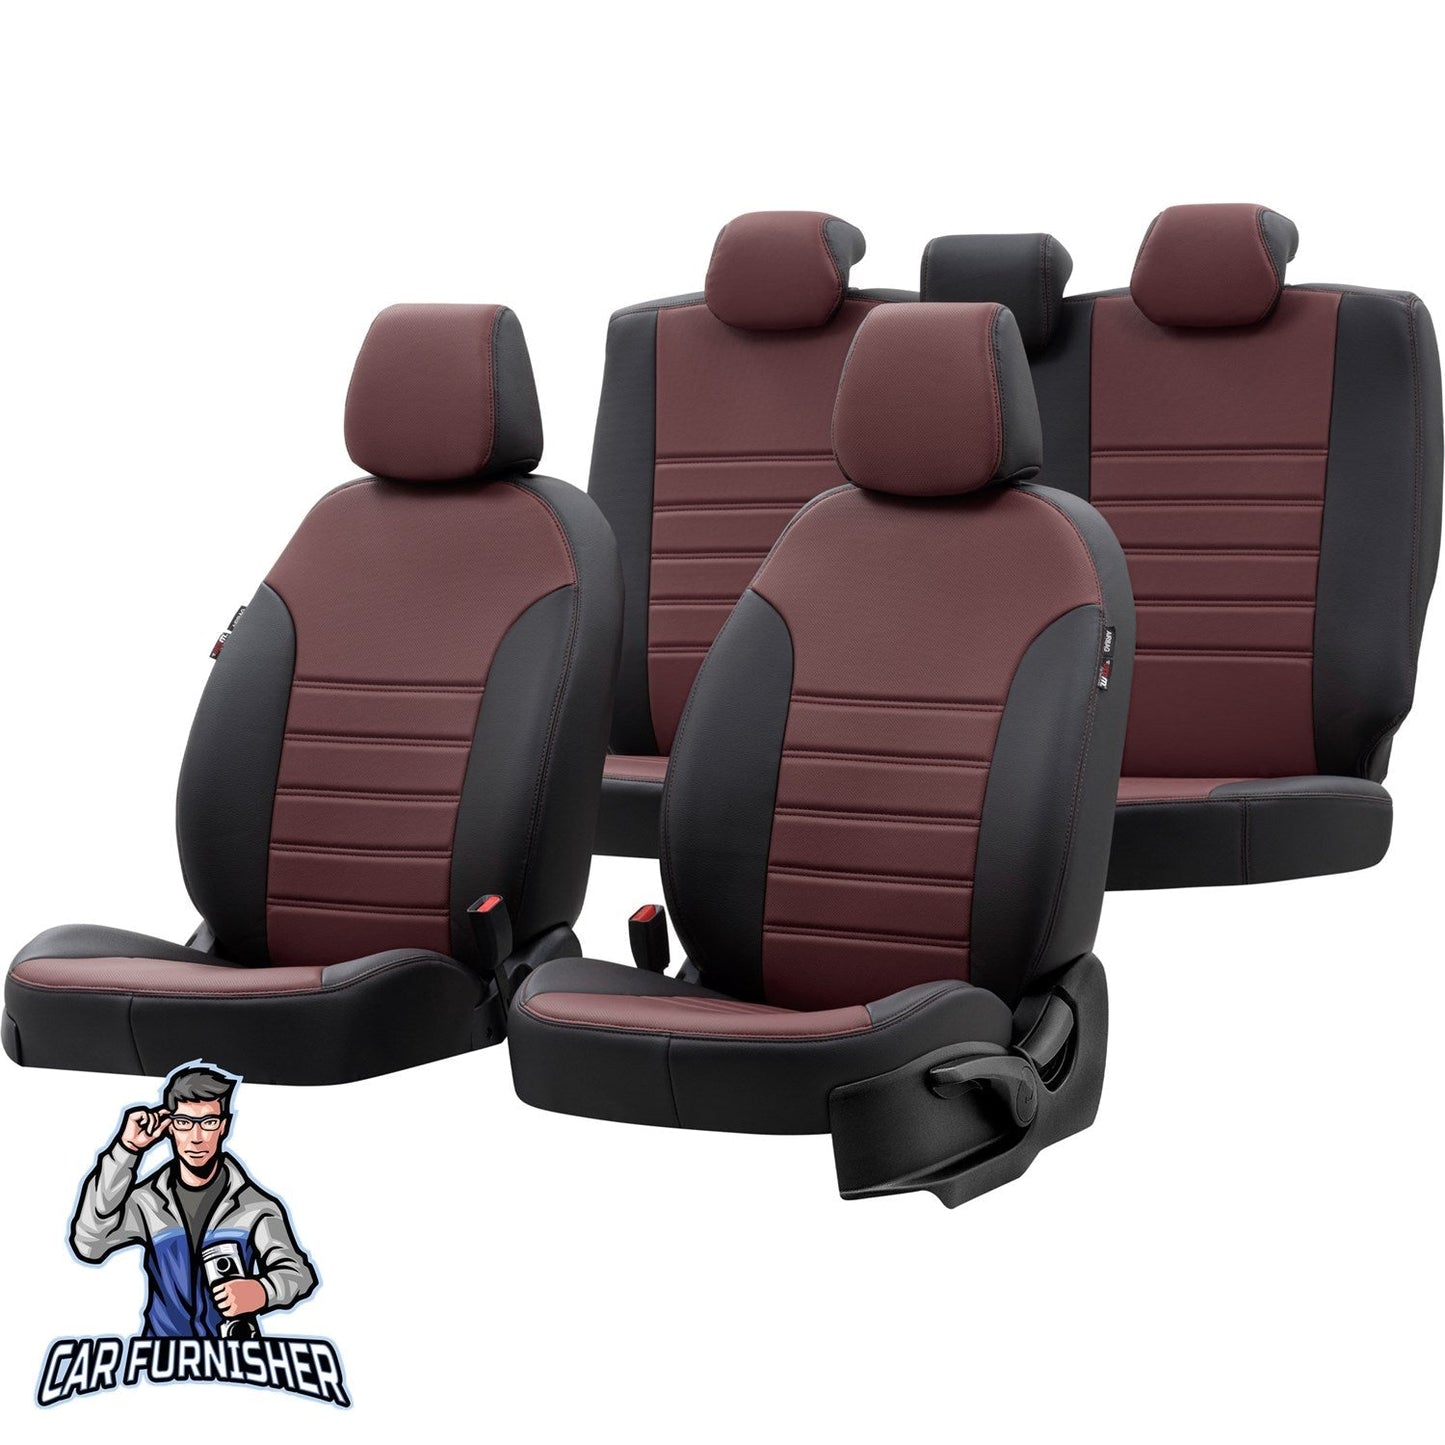 Renault Taliant Seat Covers Istanbul Leather Design Burgundy Leather